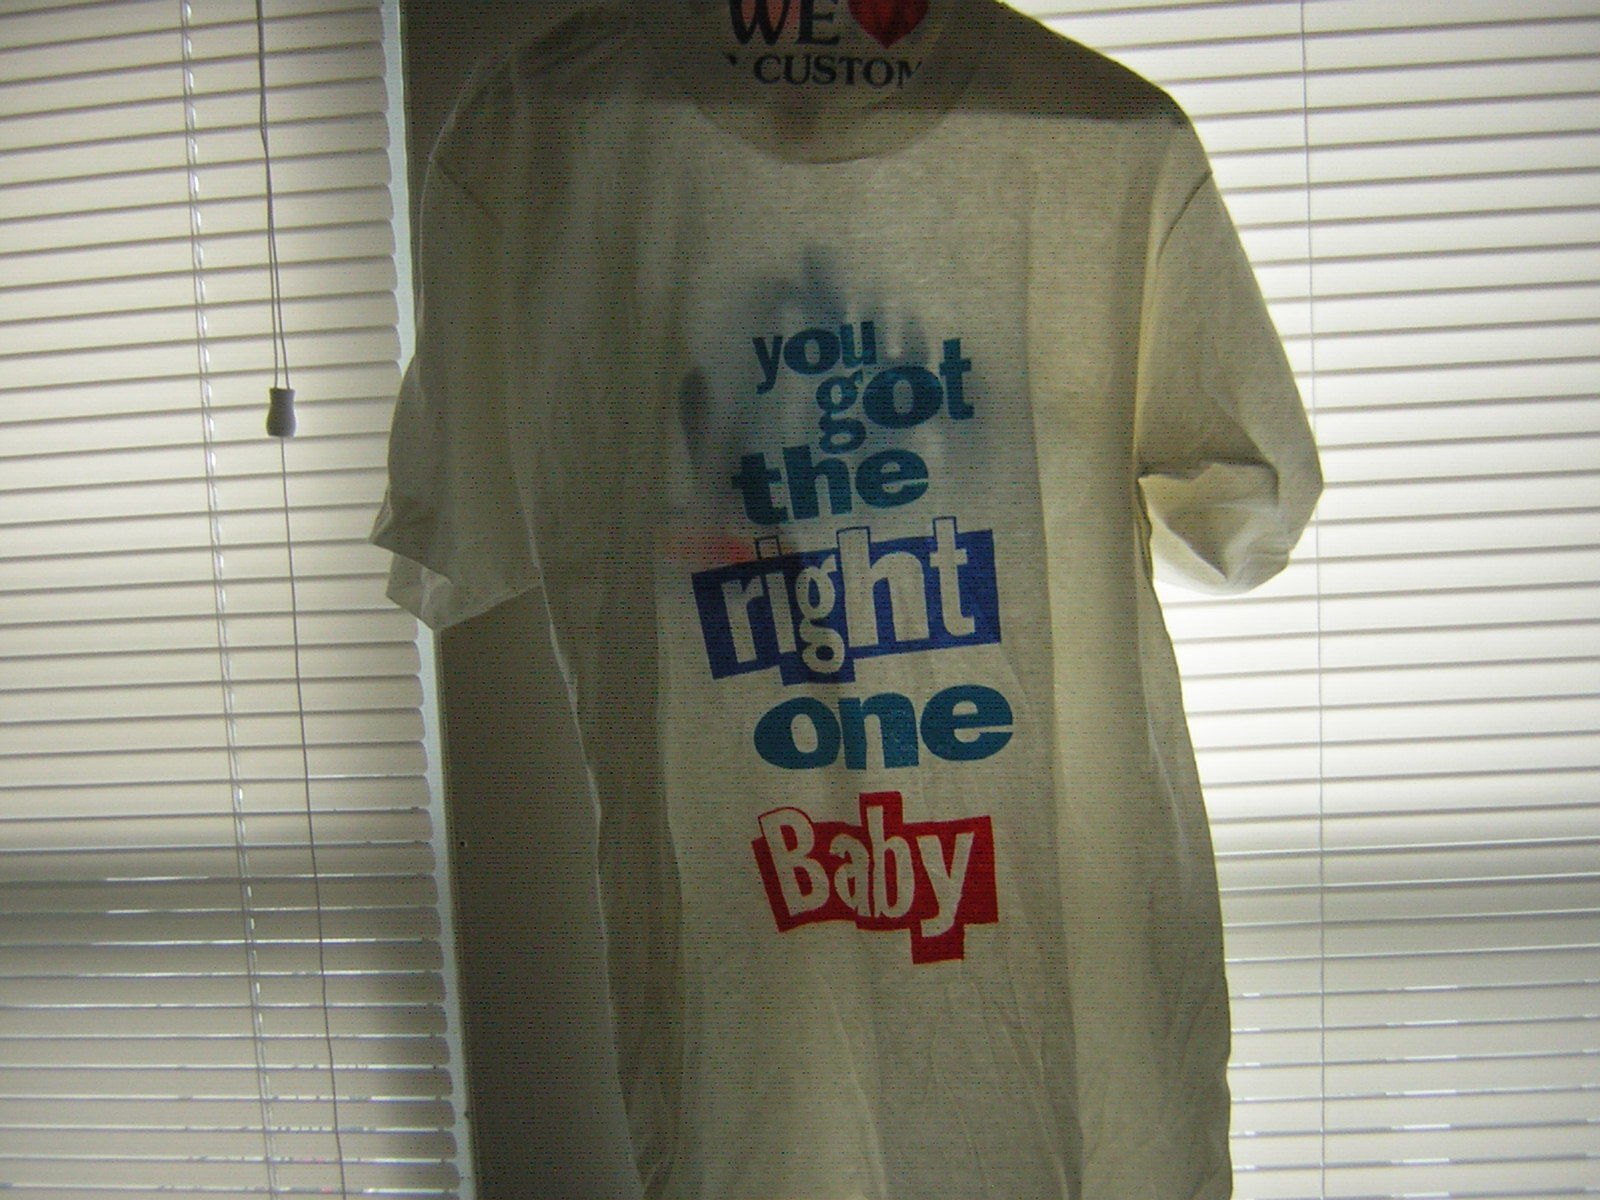  DIET PEPSI T SHIRT VINTAGE LATE 80'S YOU GOT THE RIGHT ONE BABY DEADSTOCK LARGE